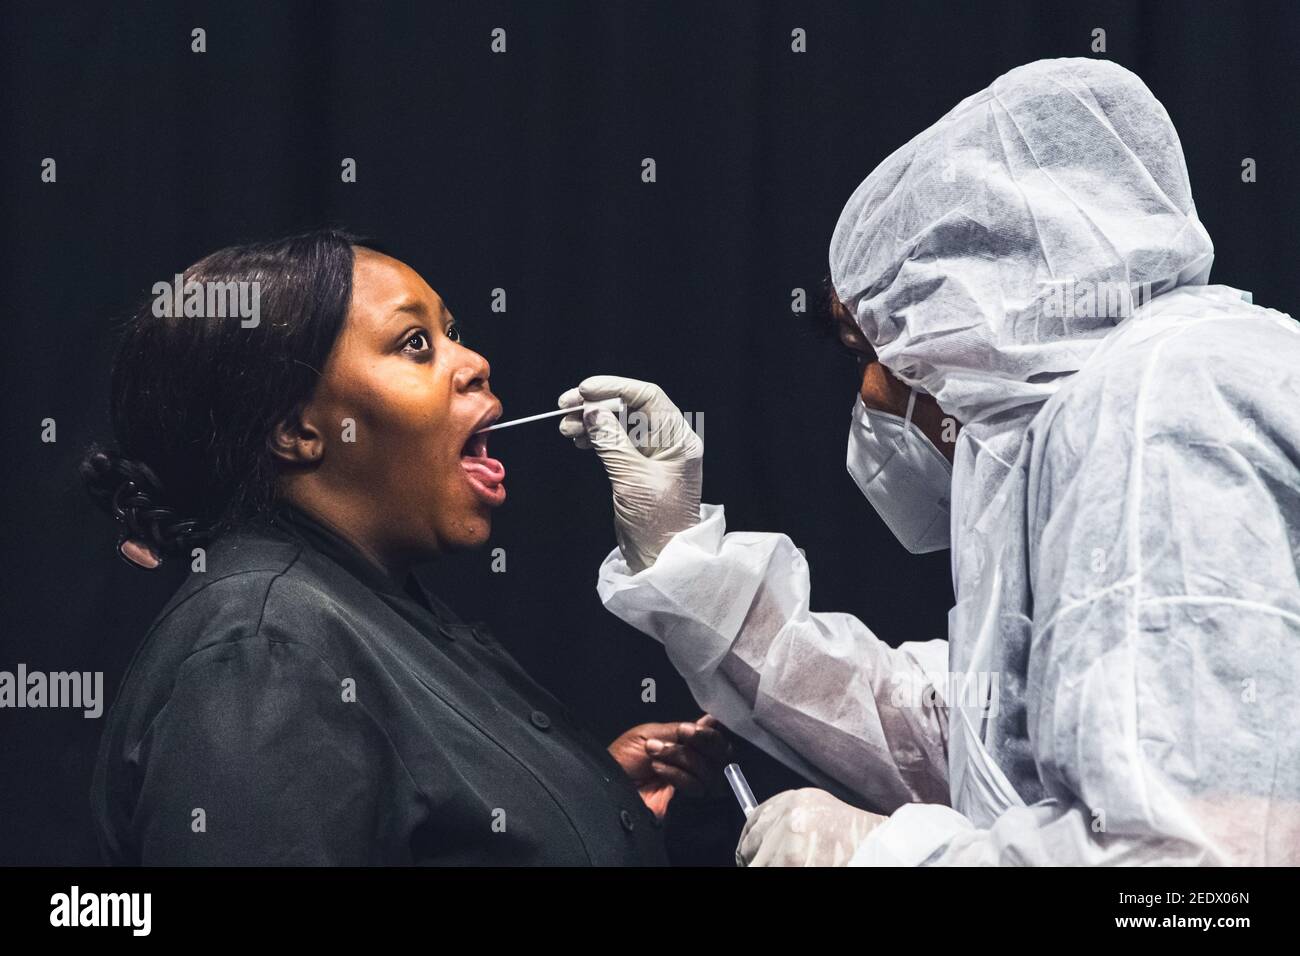 Johannesburg, South Africa - 4th February, 2021: Women being tested for viral infection with a swab in her throat. Stock Photo